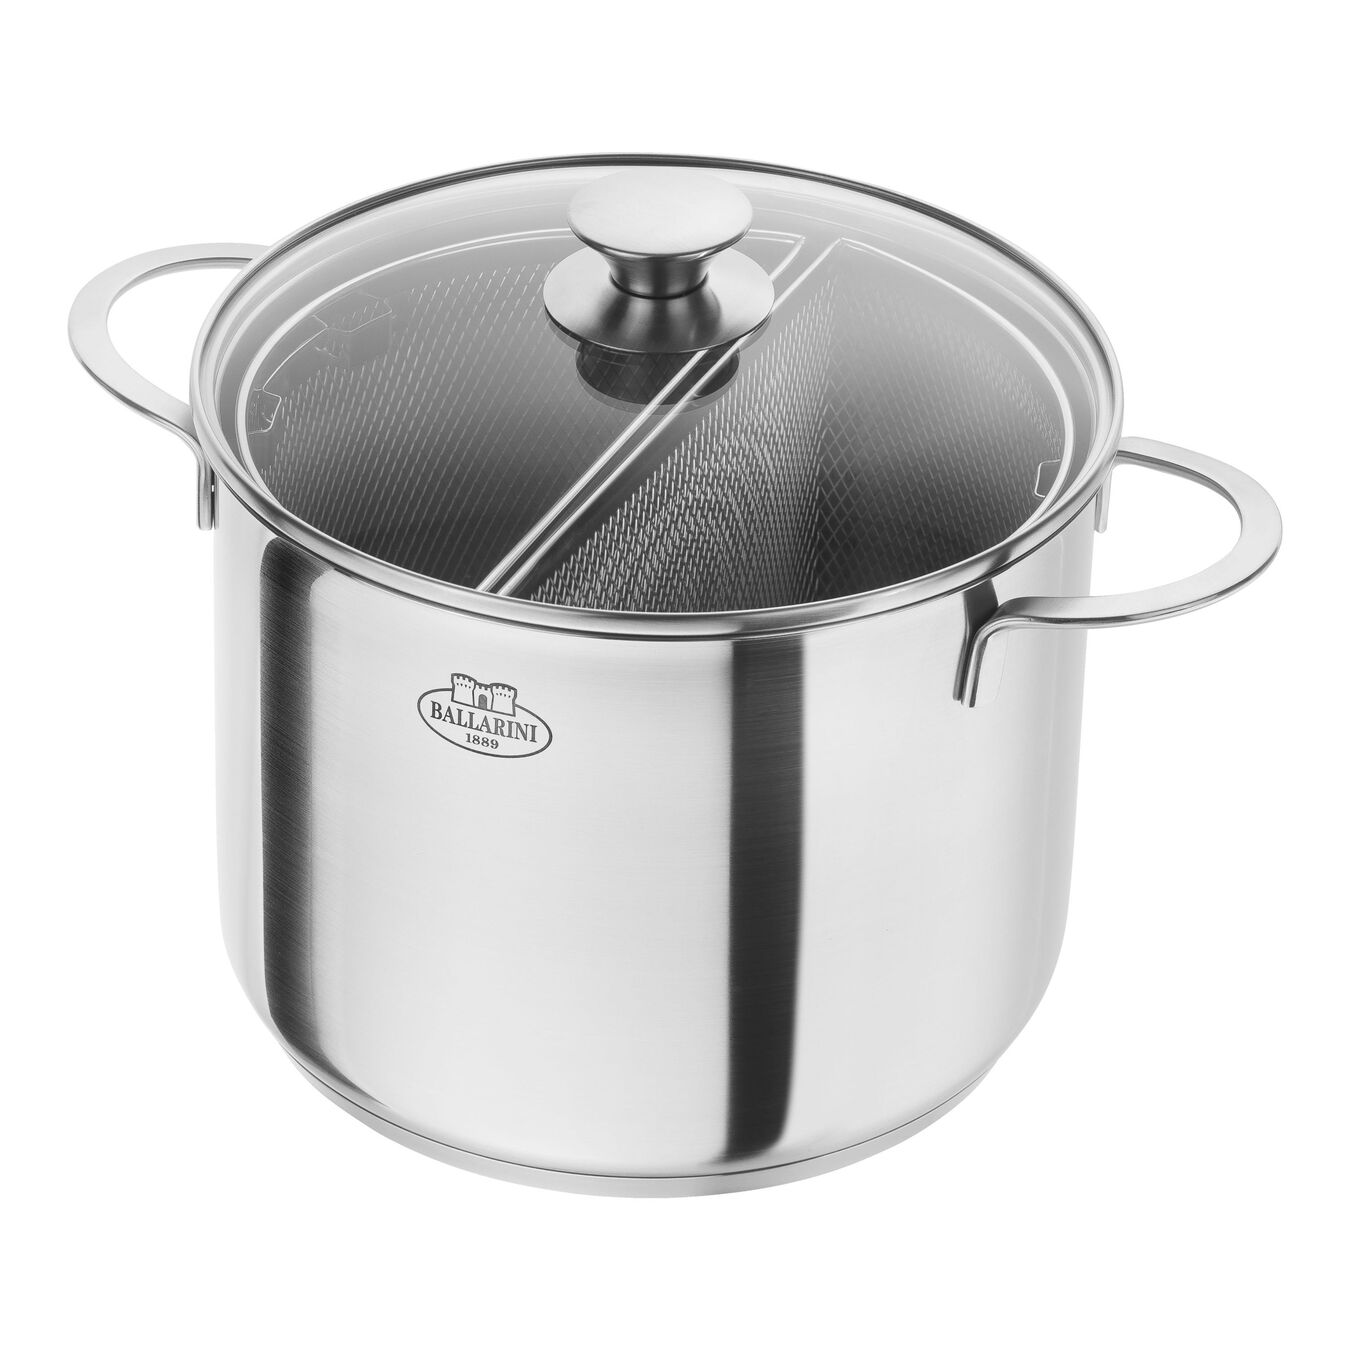 stainless steel pot with rounded handles, glass lid, and two separate half circle straining pot inserts